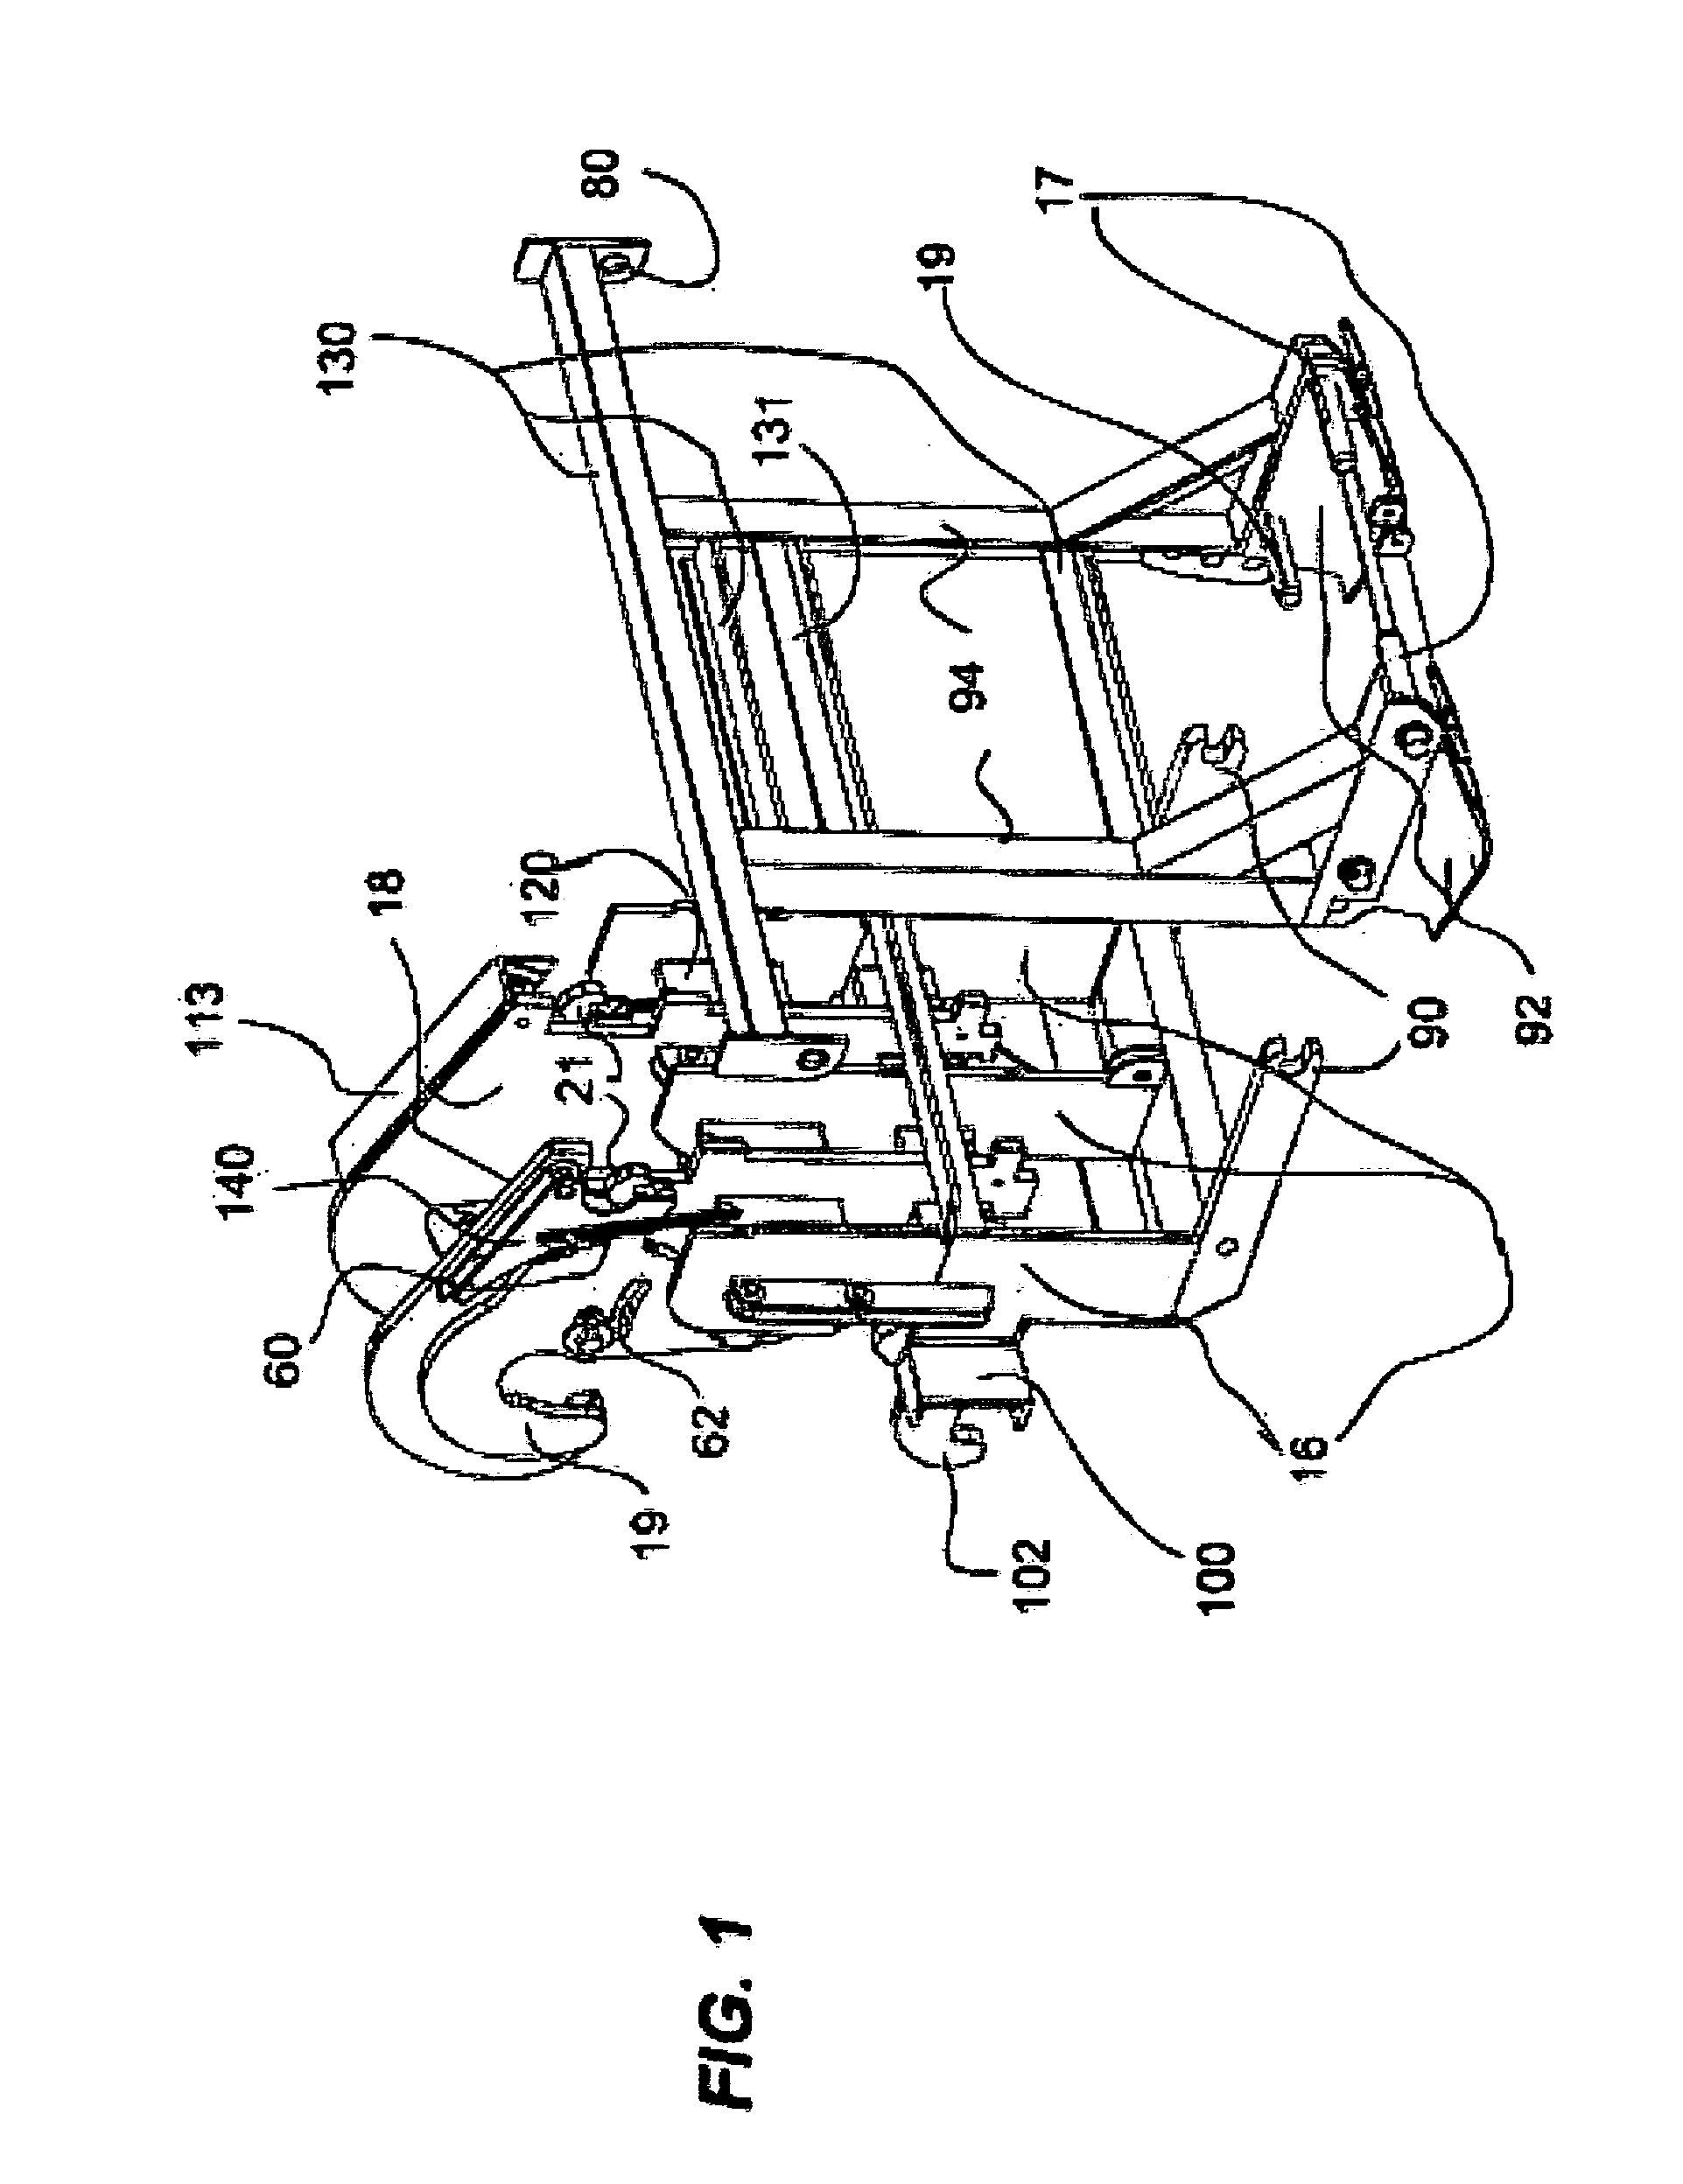 Attachment bracket for use with heavy machinery and bracket members